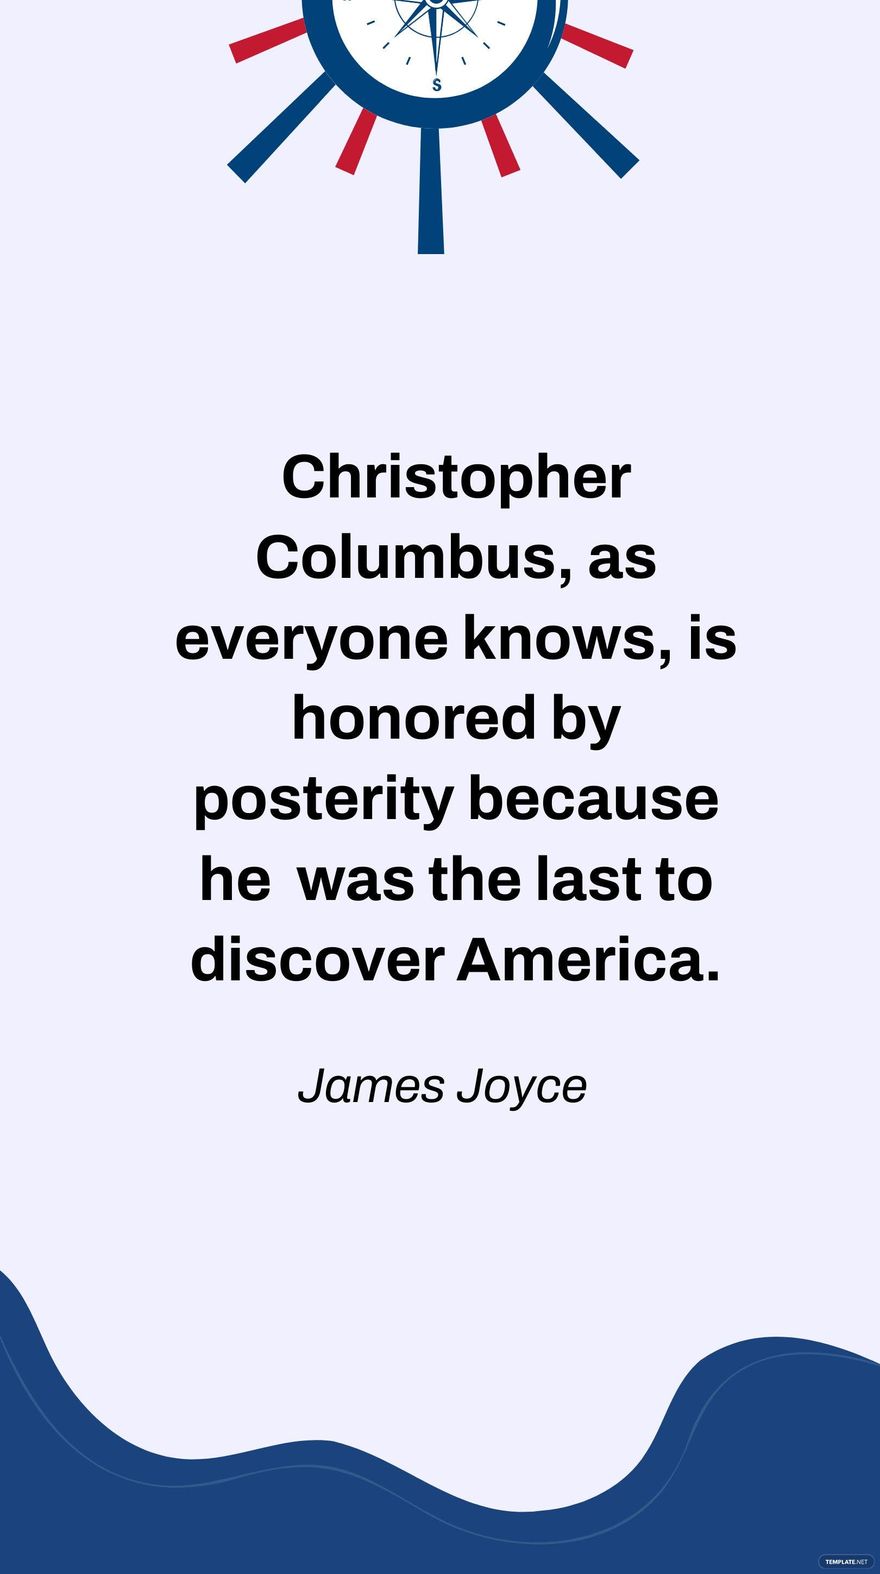 Free James Joyce- Christopher Columbus, as everyone knows, is honored by posterity because he was the last to discover America. in JPG